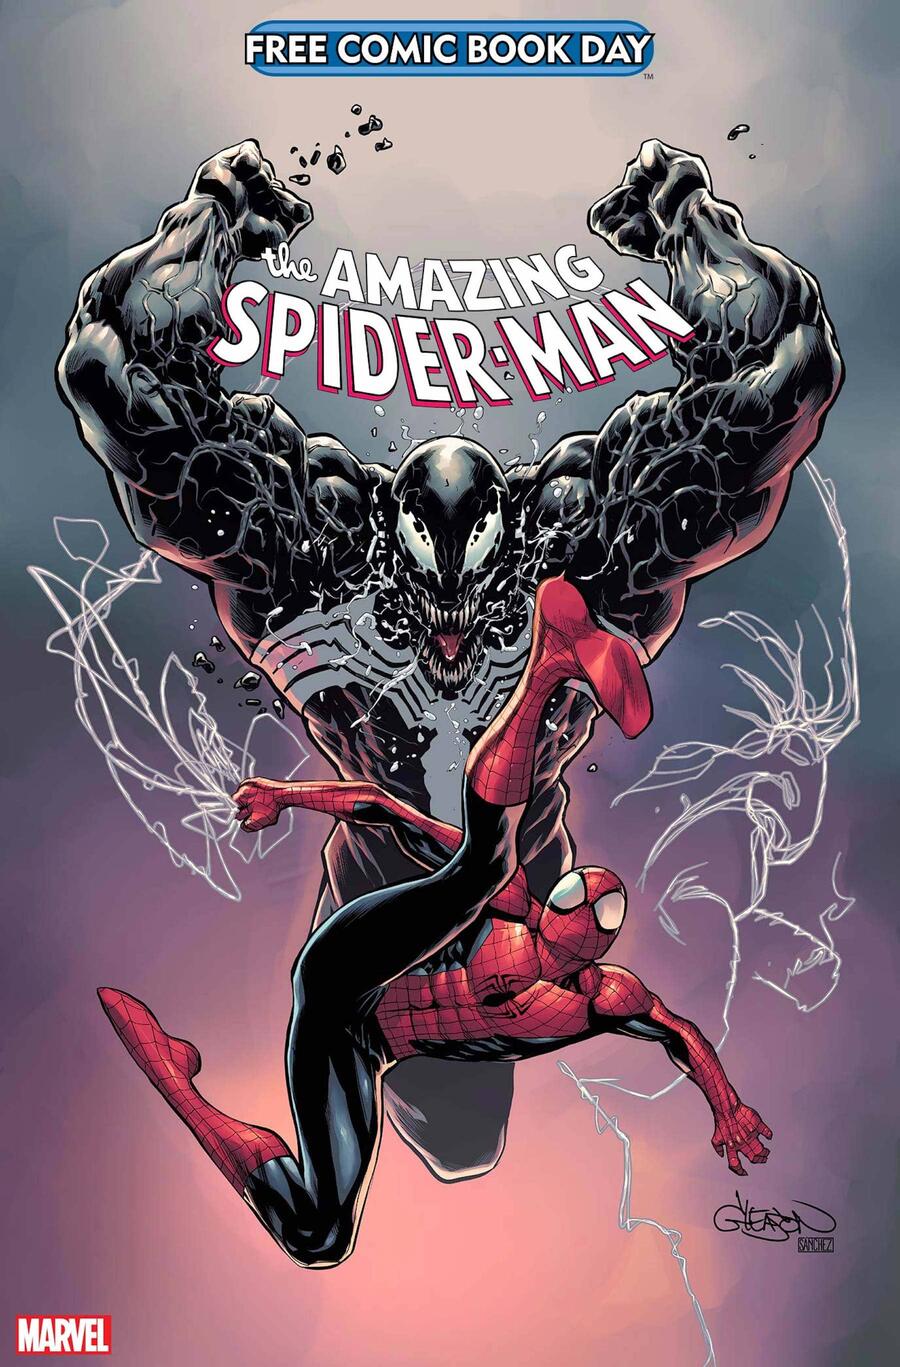 The cover for Marvel's FDCB 2021 offering featuring Spider-Man locked in battle against Venom. Art by Patrick Gleason.